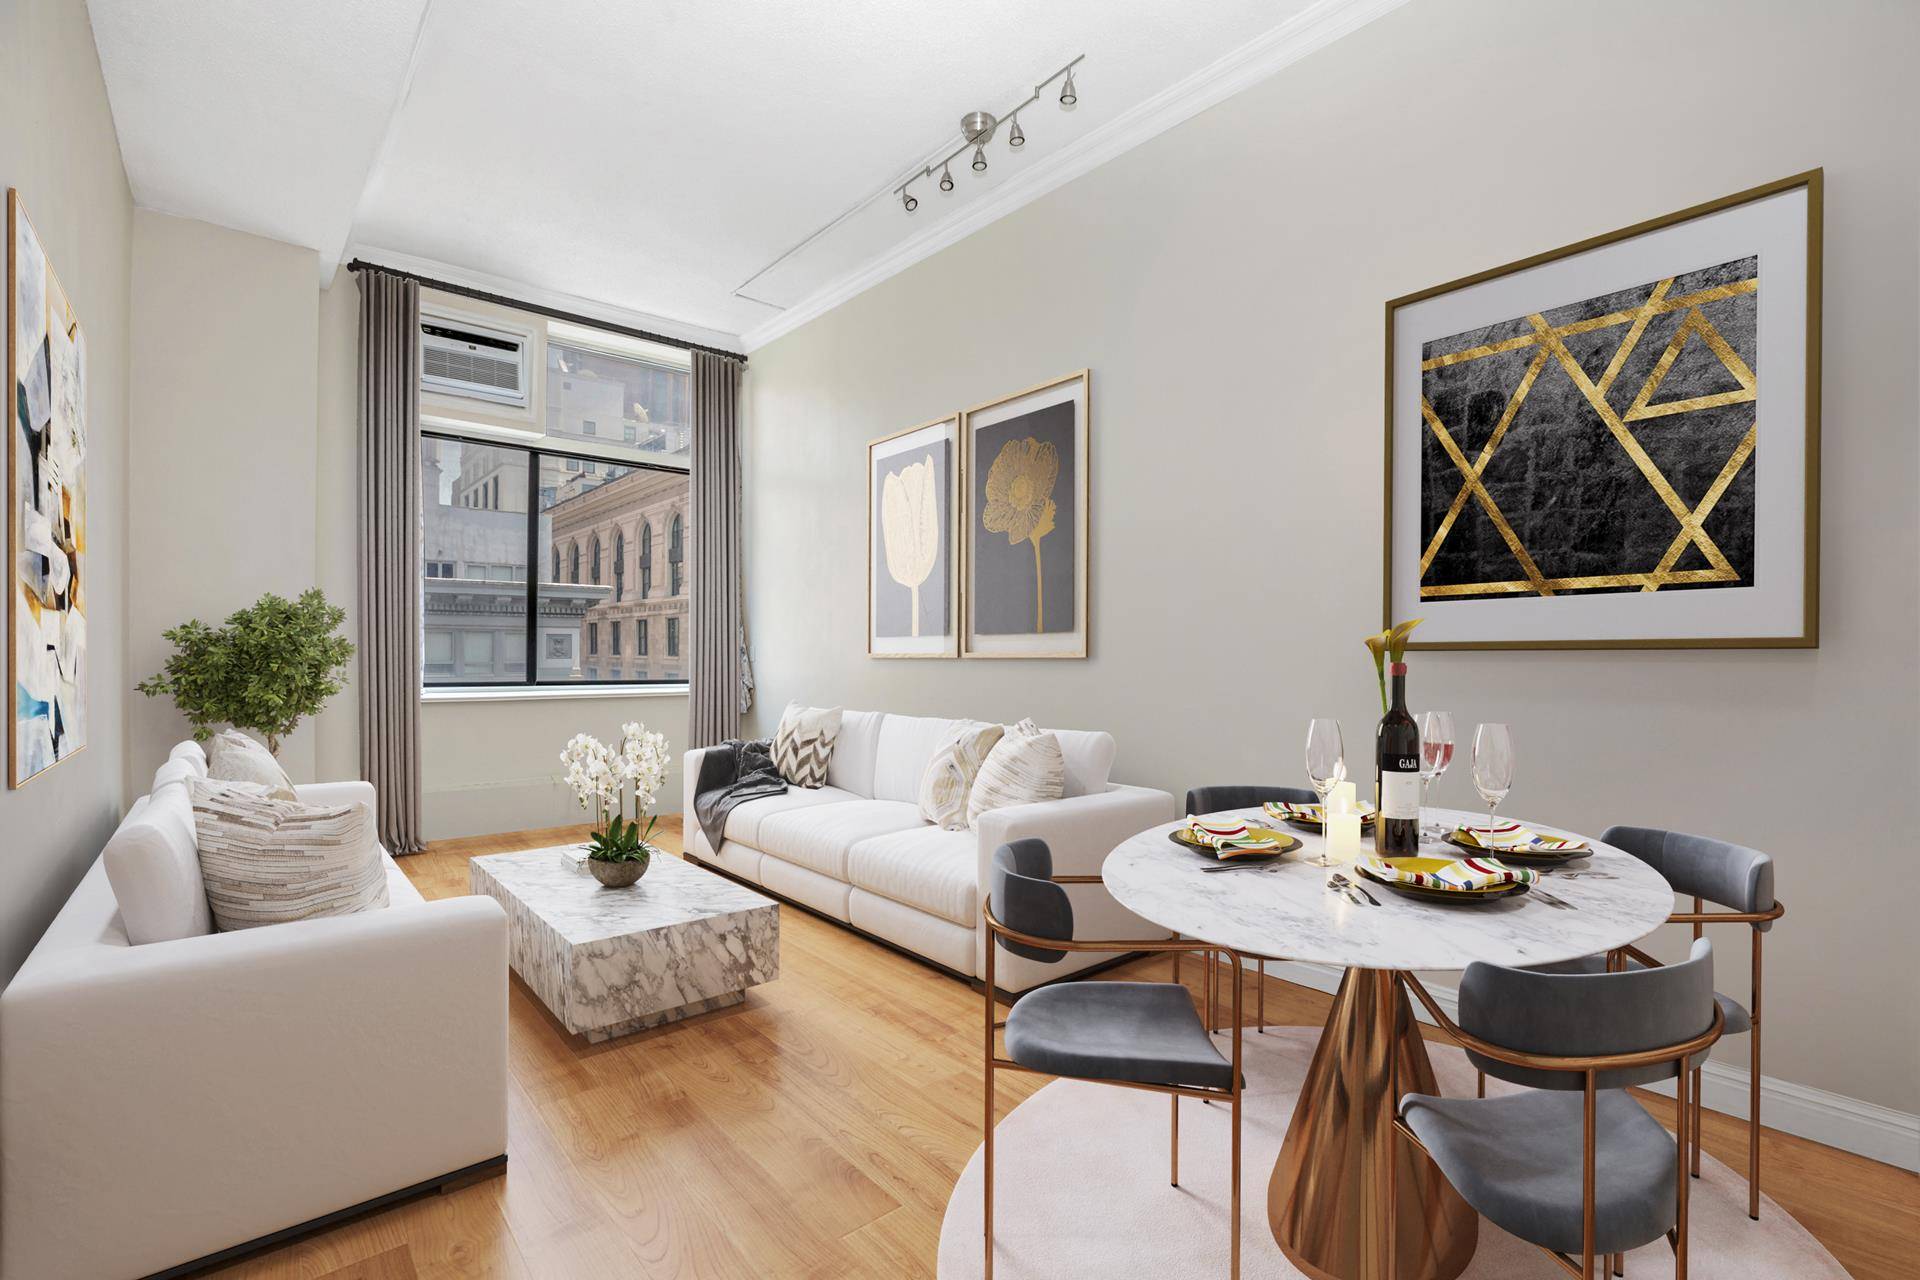 ONE OF A KIND OPPORTUNITY FOR AN AMAZING LOFT WITH 12 FOOT CEILINGS OVERLOOKING FIFTH AVENUE !